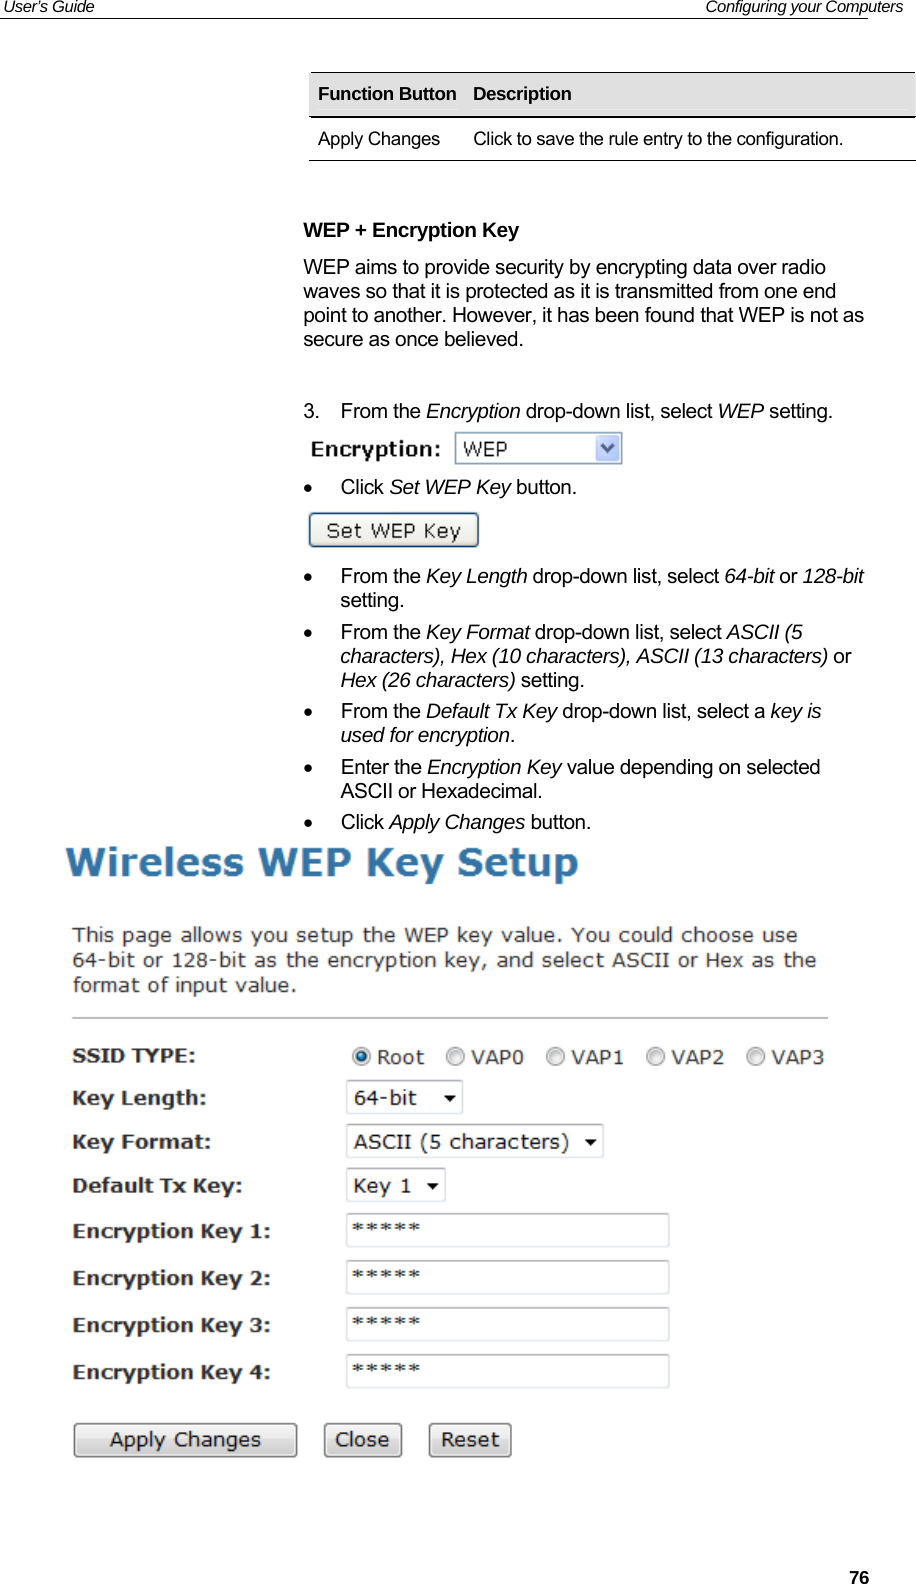 User’s Guide   Configuring your Computers   Function Button Description  Apply Changes  Click to save the rule entry to the configuration.  WEP + Encryption Key WEP aims to provide security by encrypting data over radio waves so that it is protected as it is transmitted from one end point to another. However, it has been found that WEP is not as secure as once believed.     3. From the Encryption drop-down list, select WEP setting.  • Click Set WEP Key button.  • From the Key Length drop-down list, select 64-bit or 128-bit setting. • From the Key Format drop-down list, select ASCII (5 characters), Hex (10 characters), ASCII (13 characters) or Hex (26 characters) setting. • From the Default Tx Key drop-down list, select a key is used for encryption. • Enter the Encryption Key value depending on selected ASCII or Hexadecimal. • Click Apply Changes button.    76